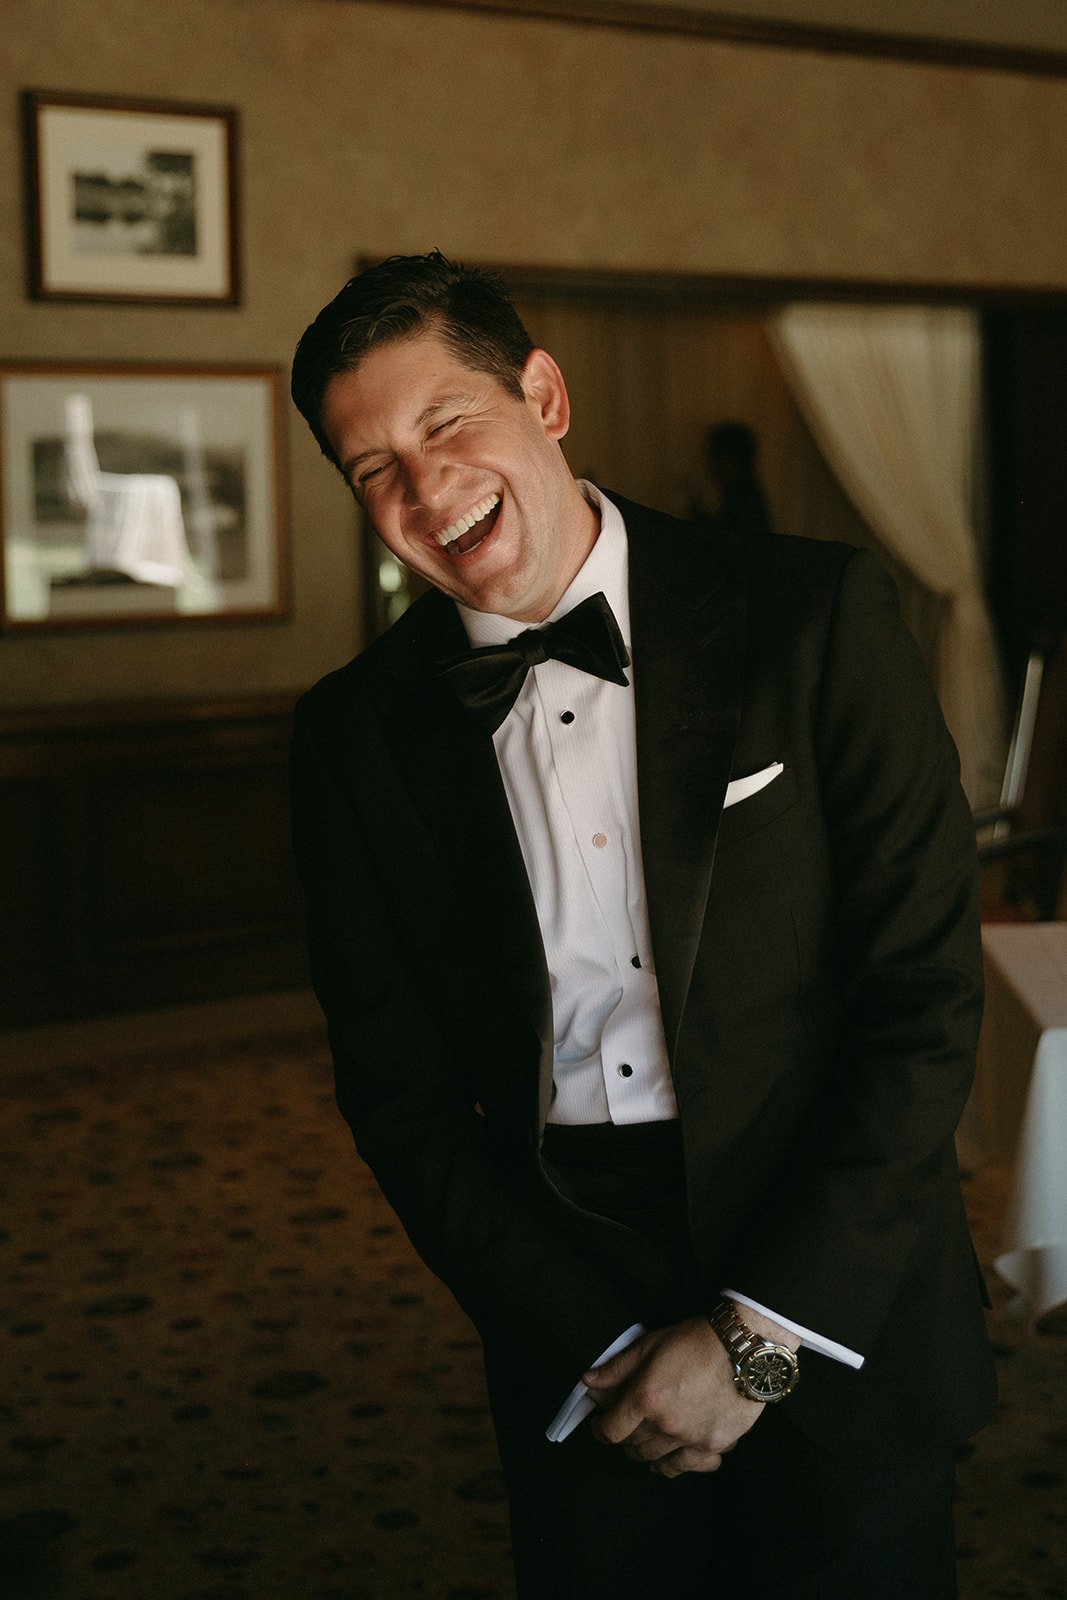 Groom laughing while getting ready